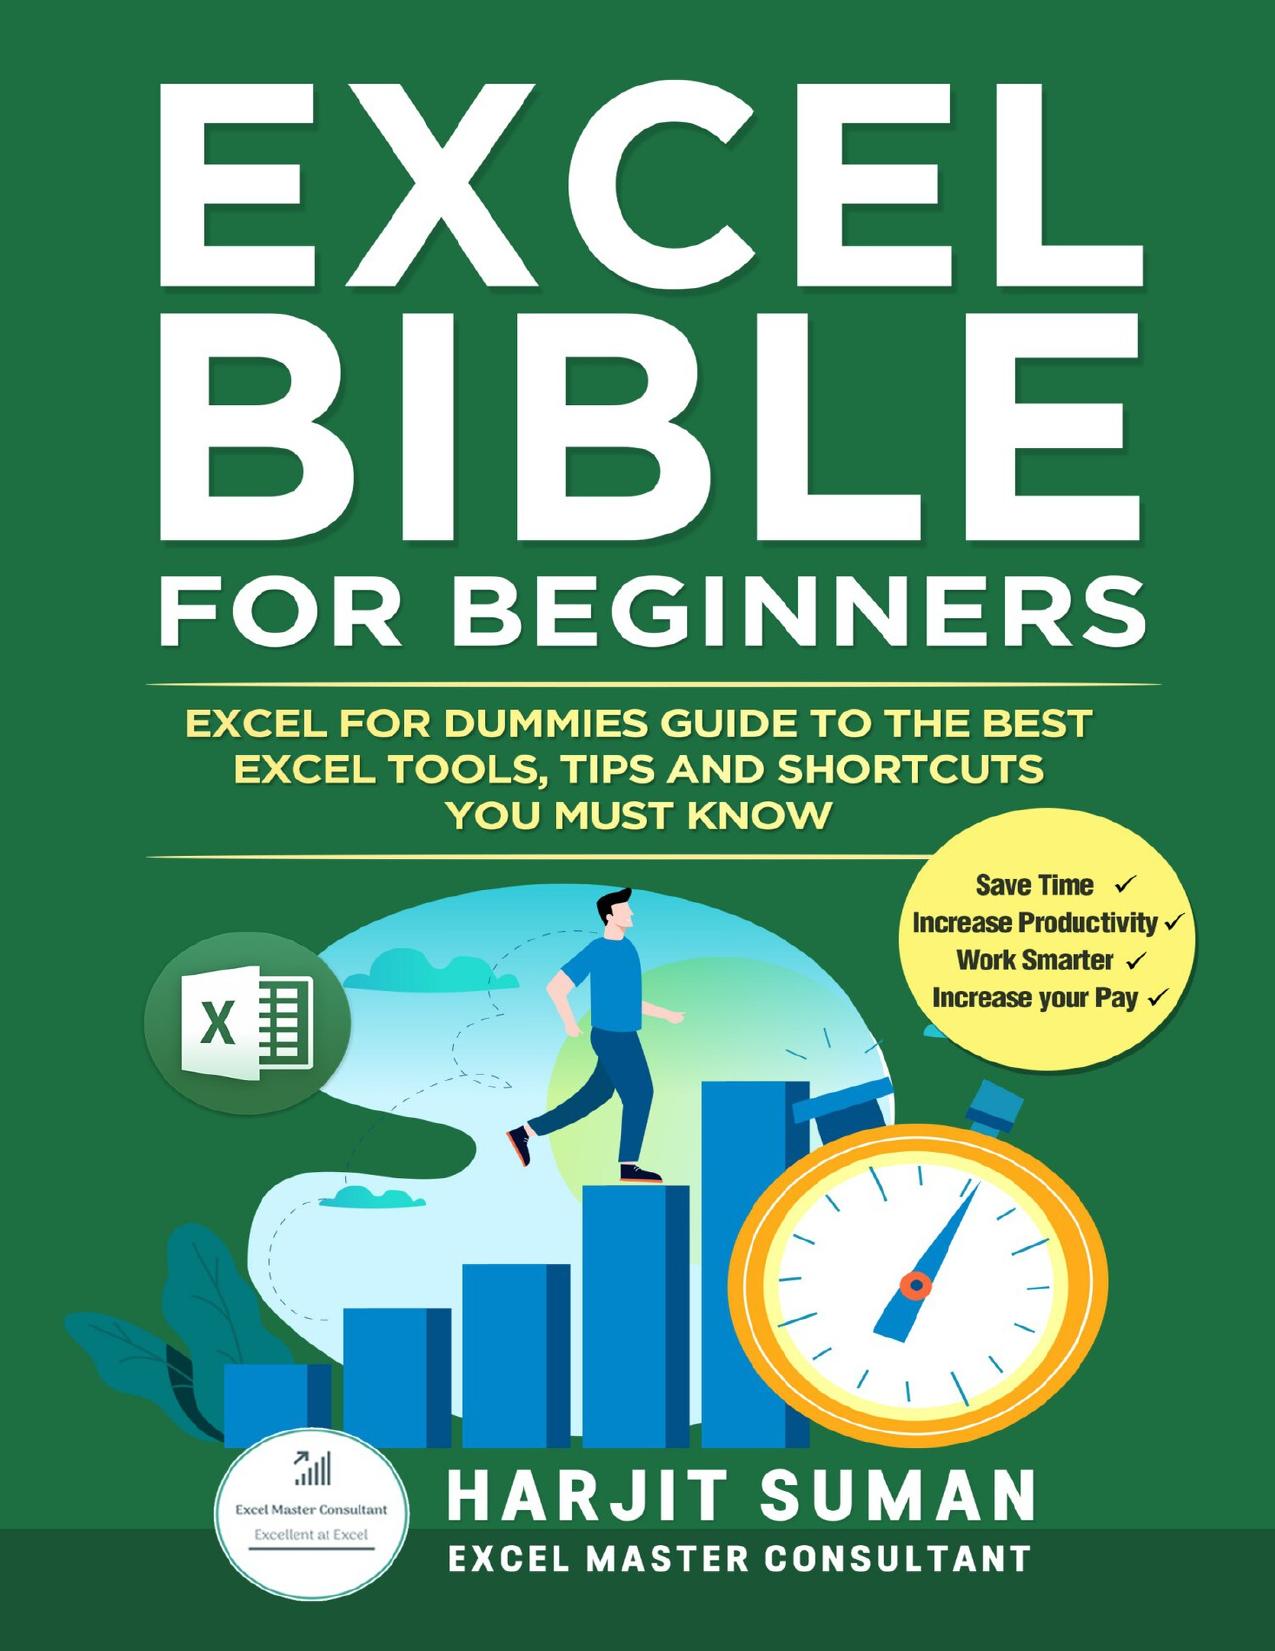 Excel Bible for Beginners: Excel for Dummies Guide to the Best Excel Tools, Tips and Shortcuts you Must Know by Suman Harjit